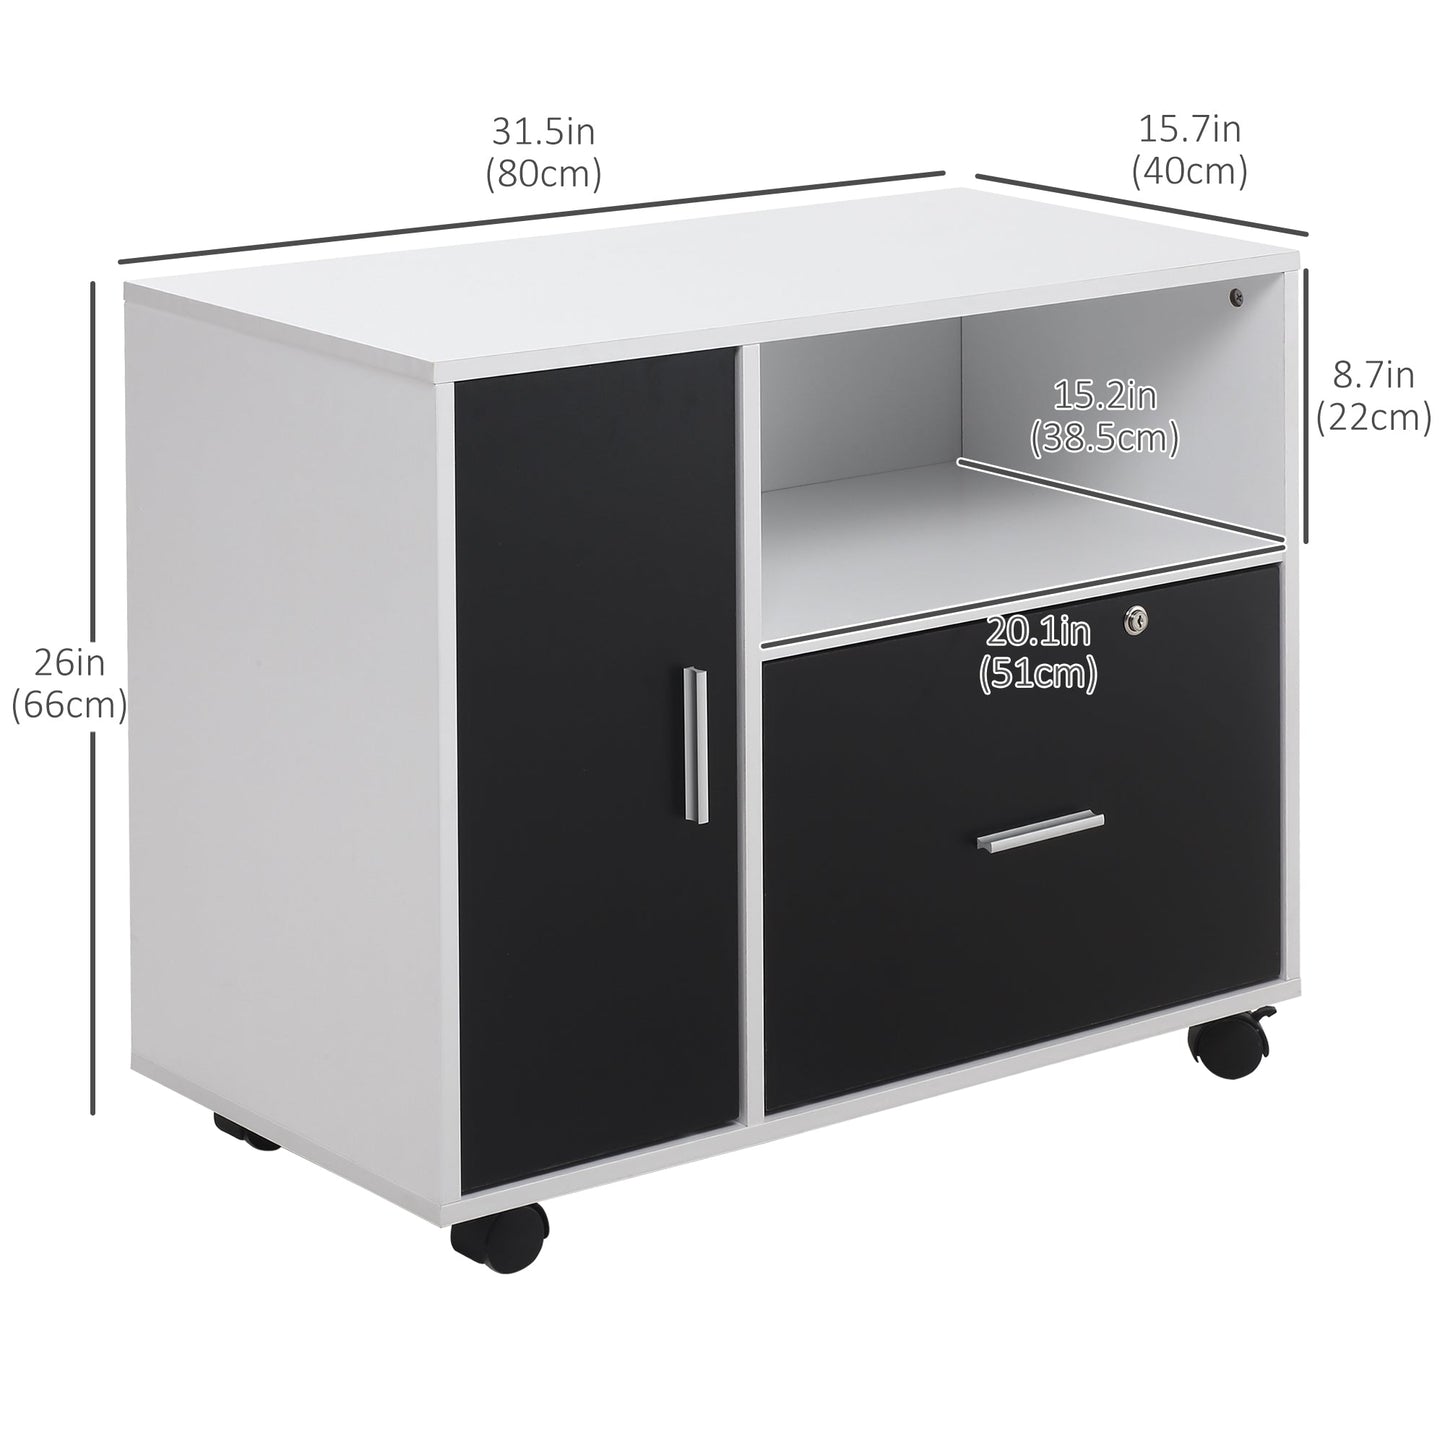 Lateral Filing Cabinet with Lockable Drawer for Hanging Legal, Letter Sized Files, Mobile Printer Stand for Home Office, Black and White at Gallery Canada